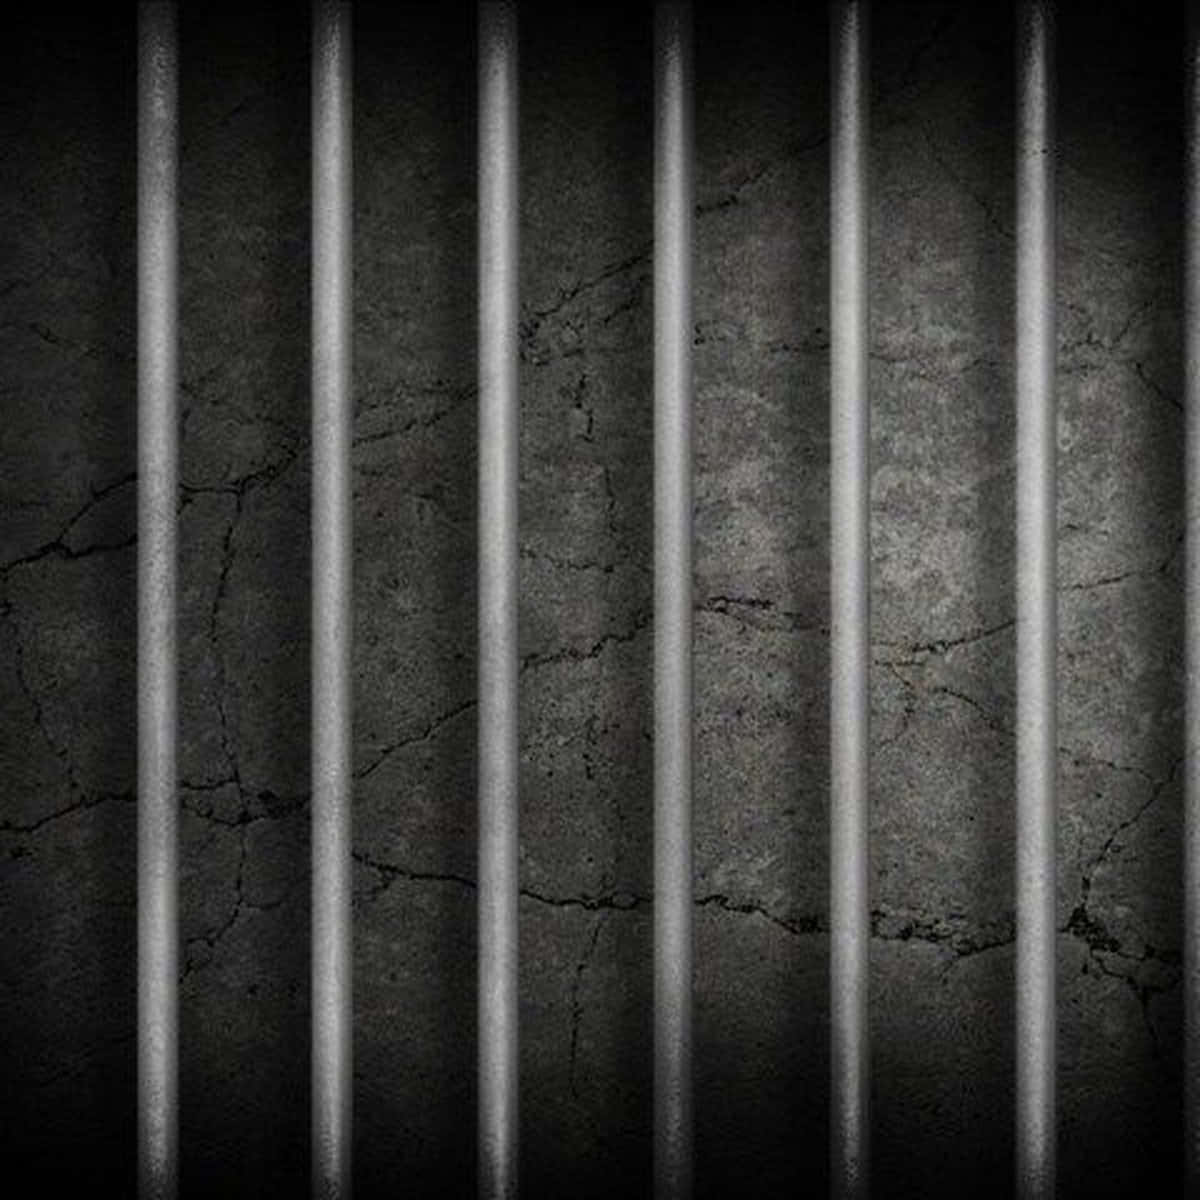 Concrete Wall Jail Cell Background